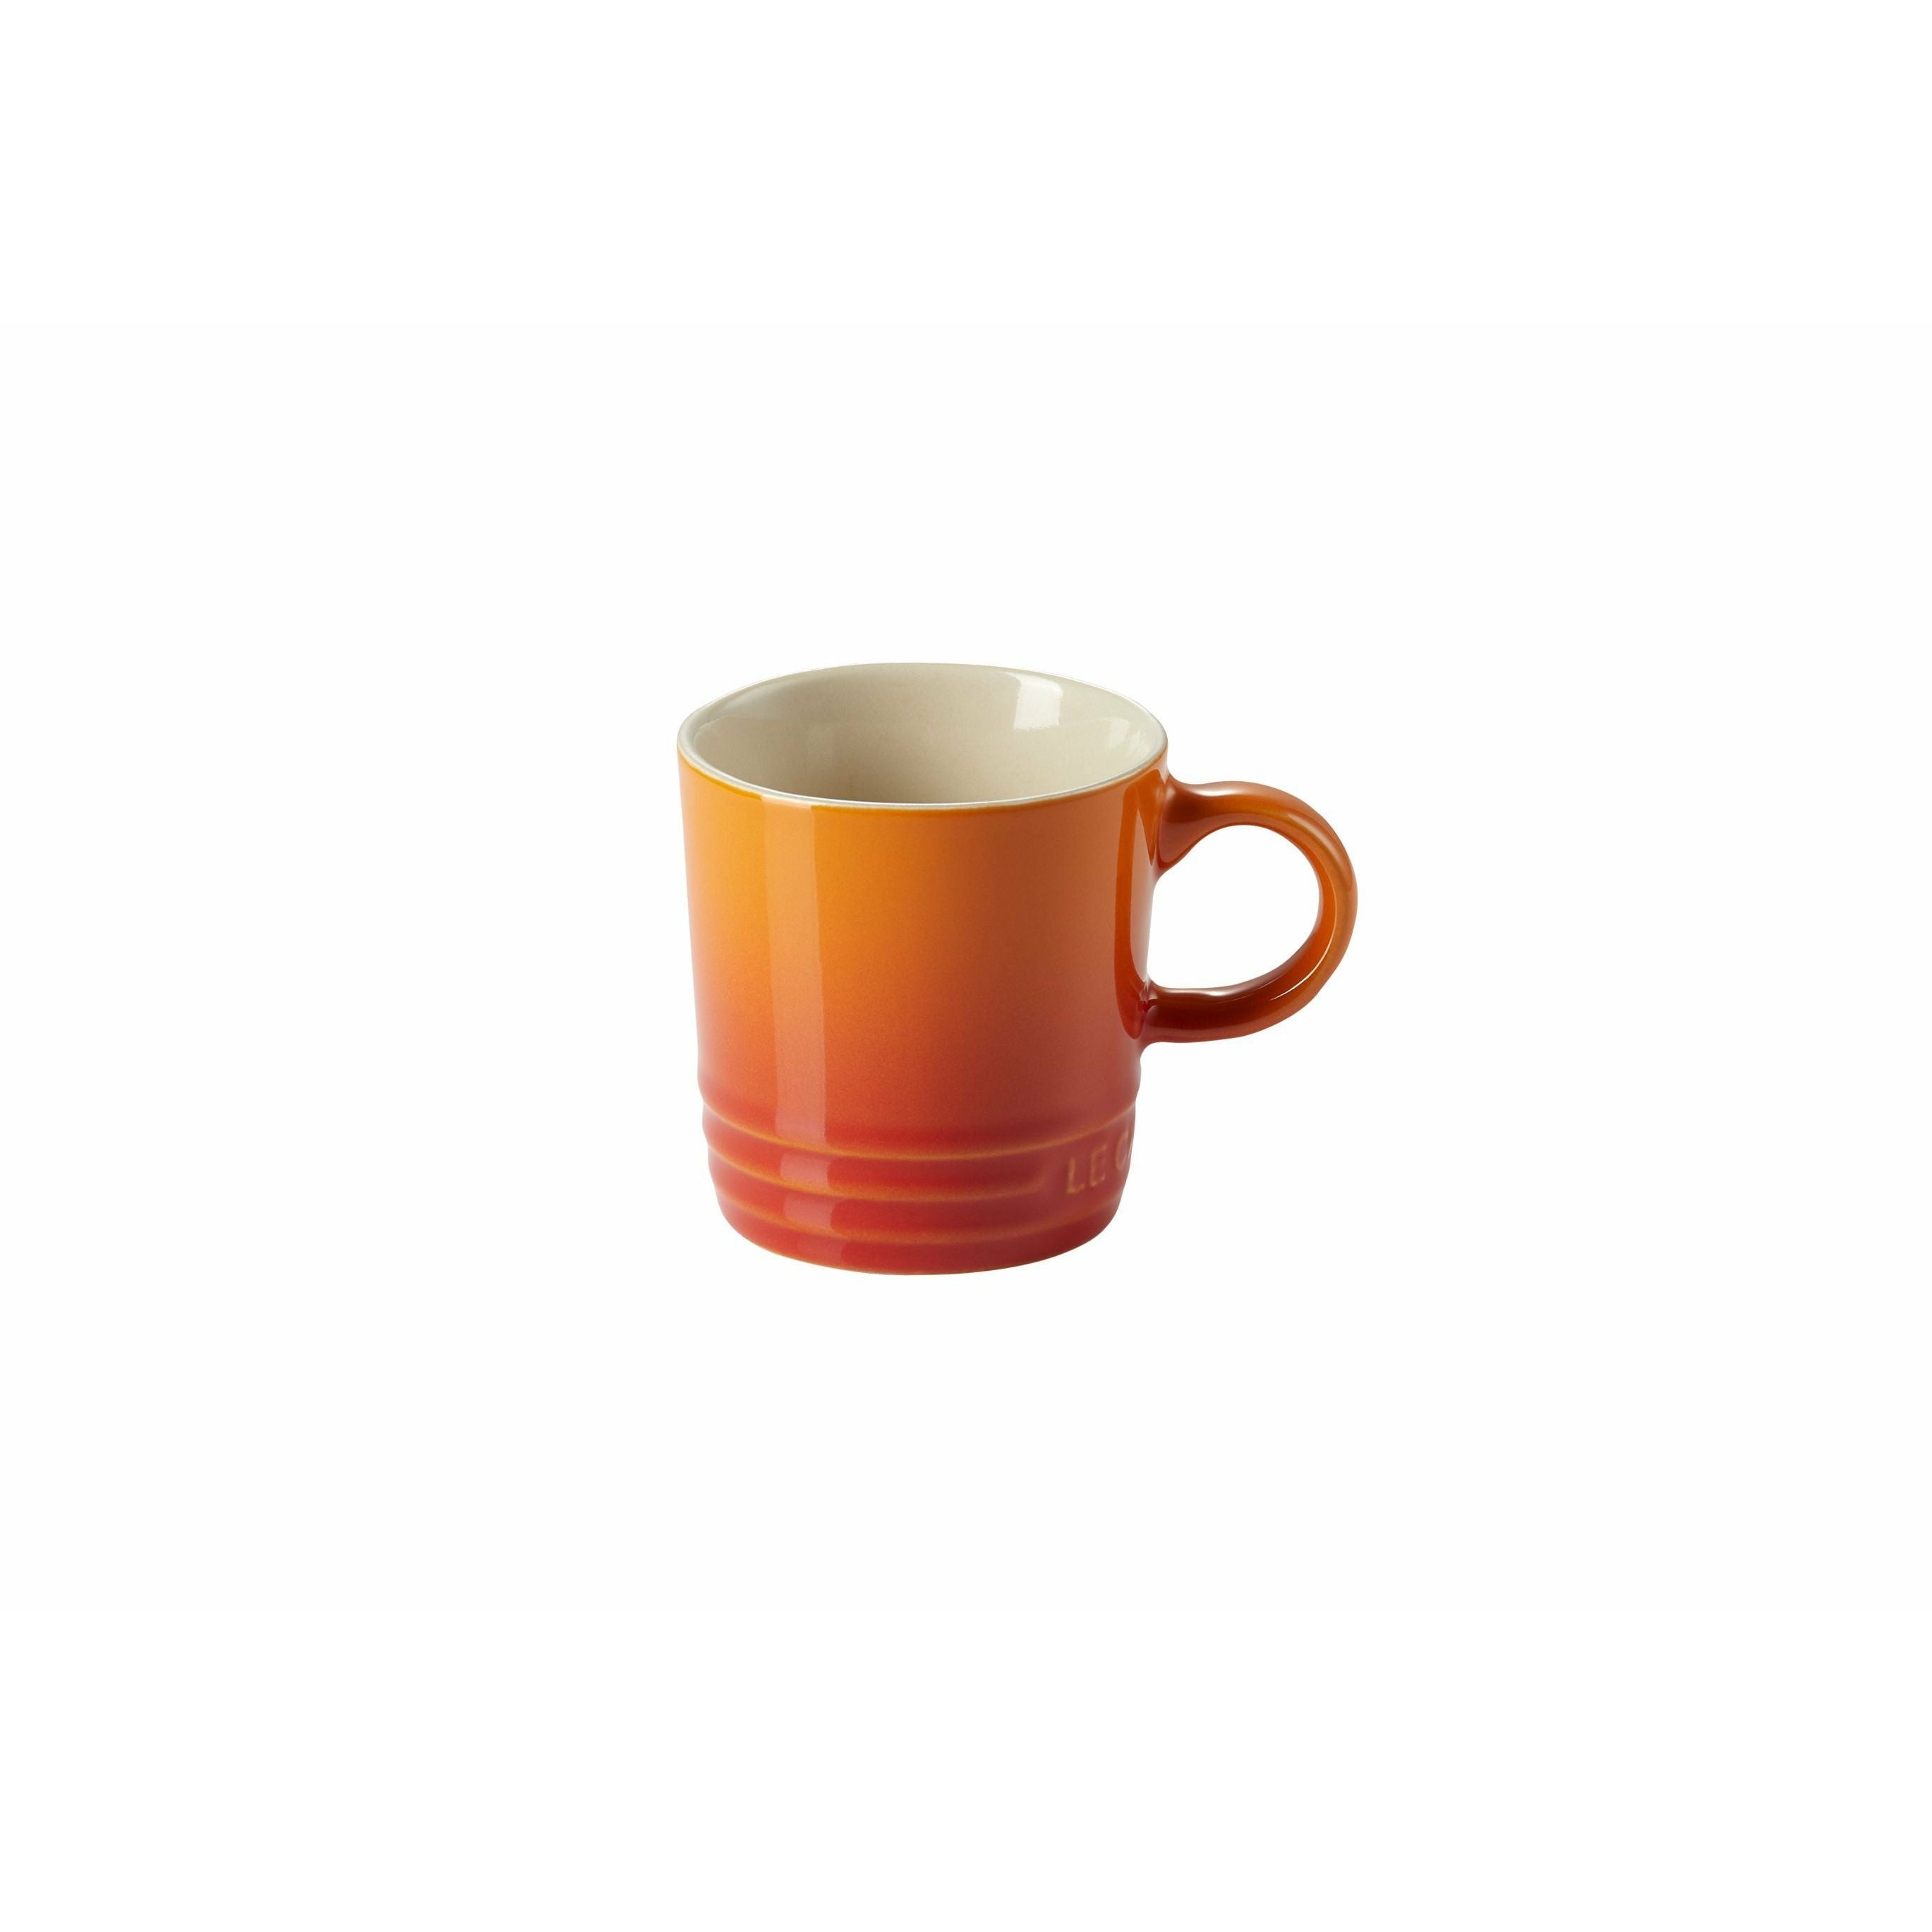 Le Creuset Espresso Cup 100 Ml, Oven Red